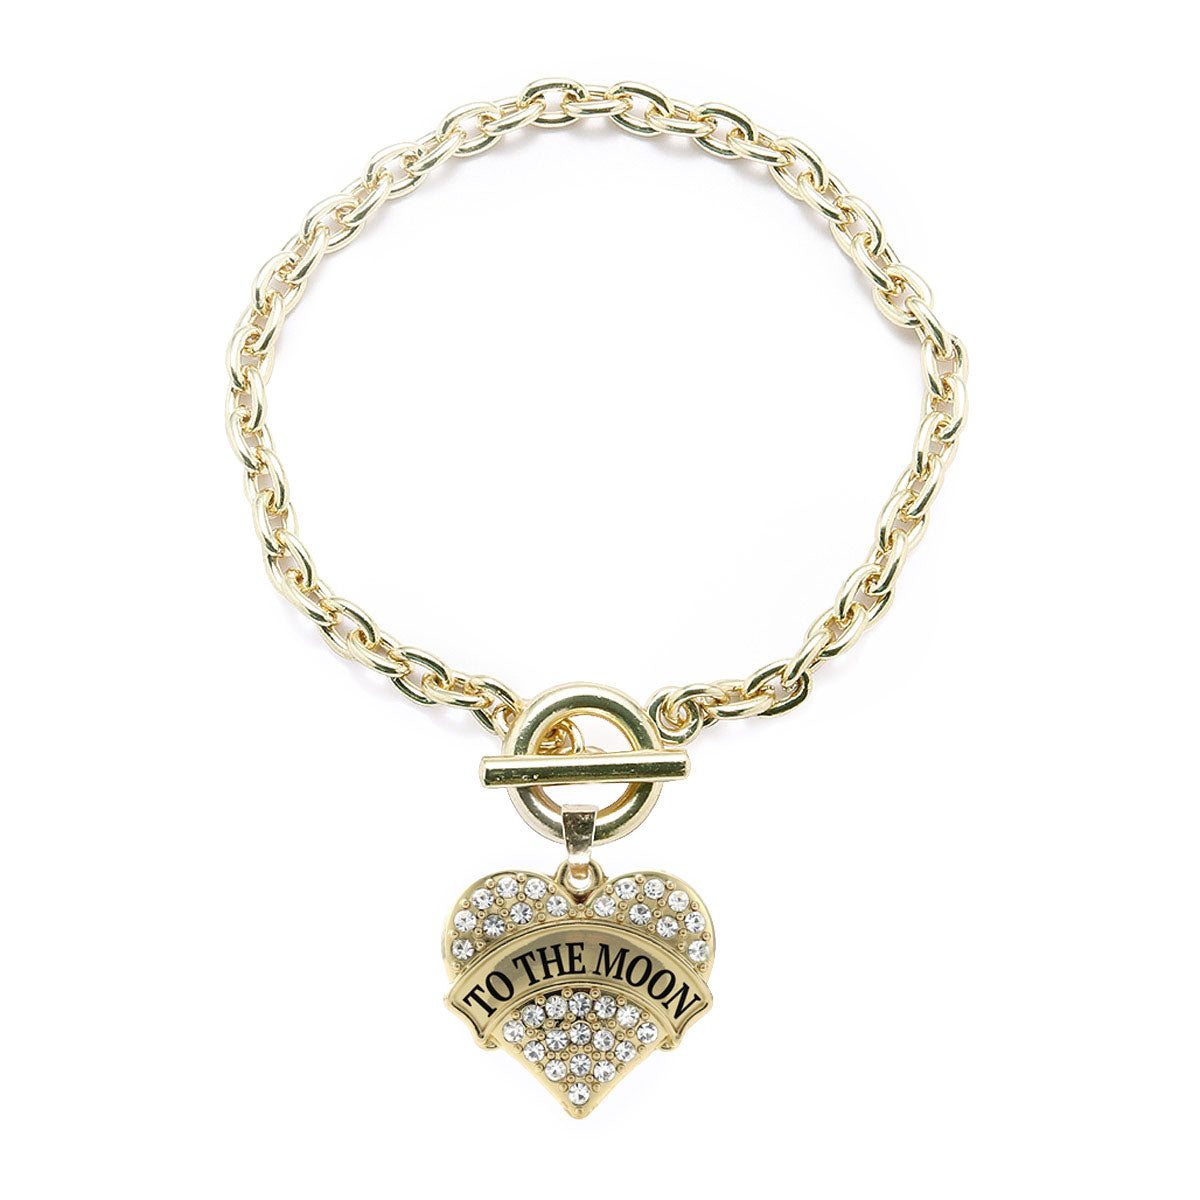 Gold To The Moon Pave Heart Charm Toggle Bracelet